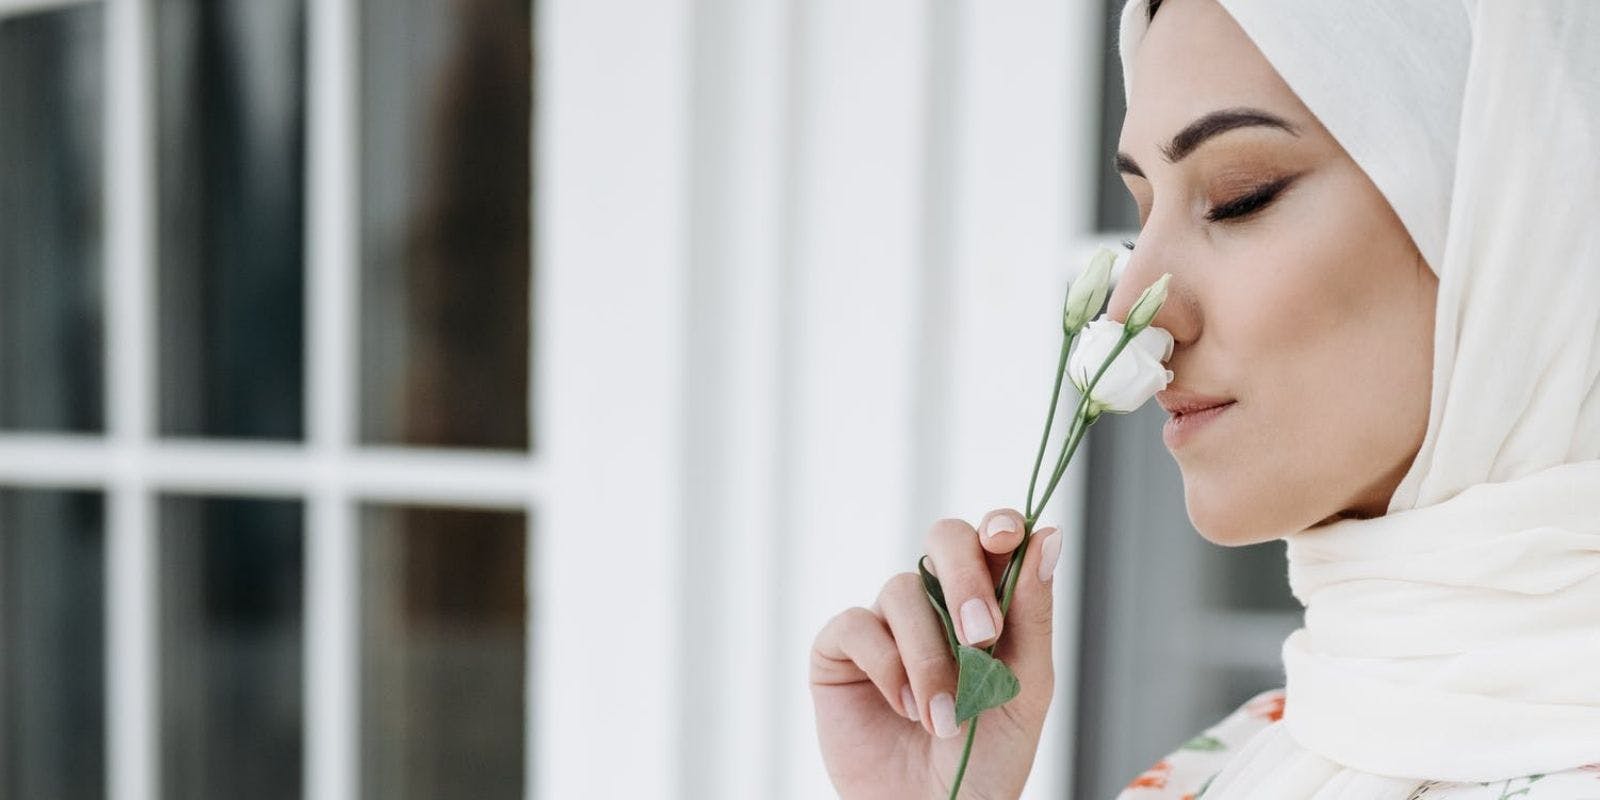 Menstrual Pheromones: How Scent Could Be Connected To Your Cycle